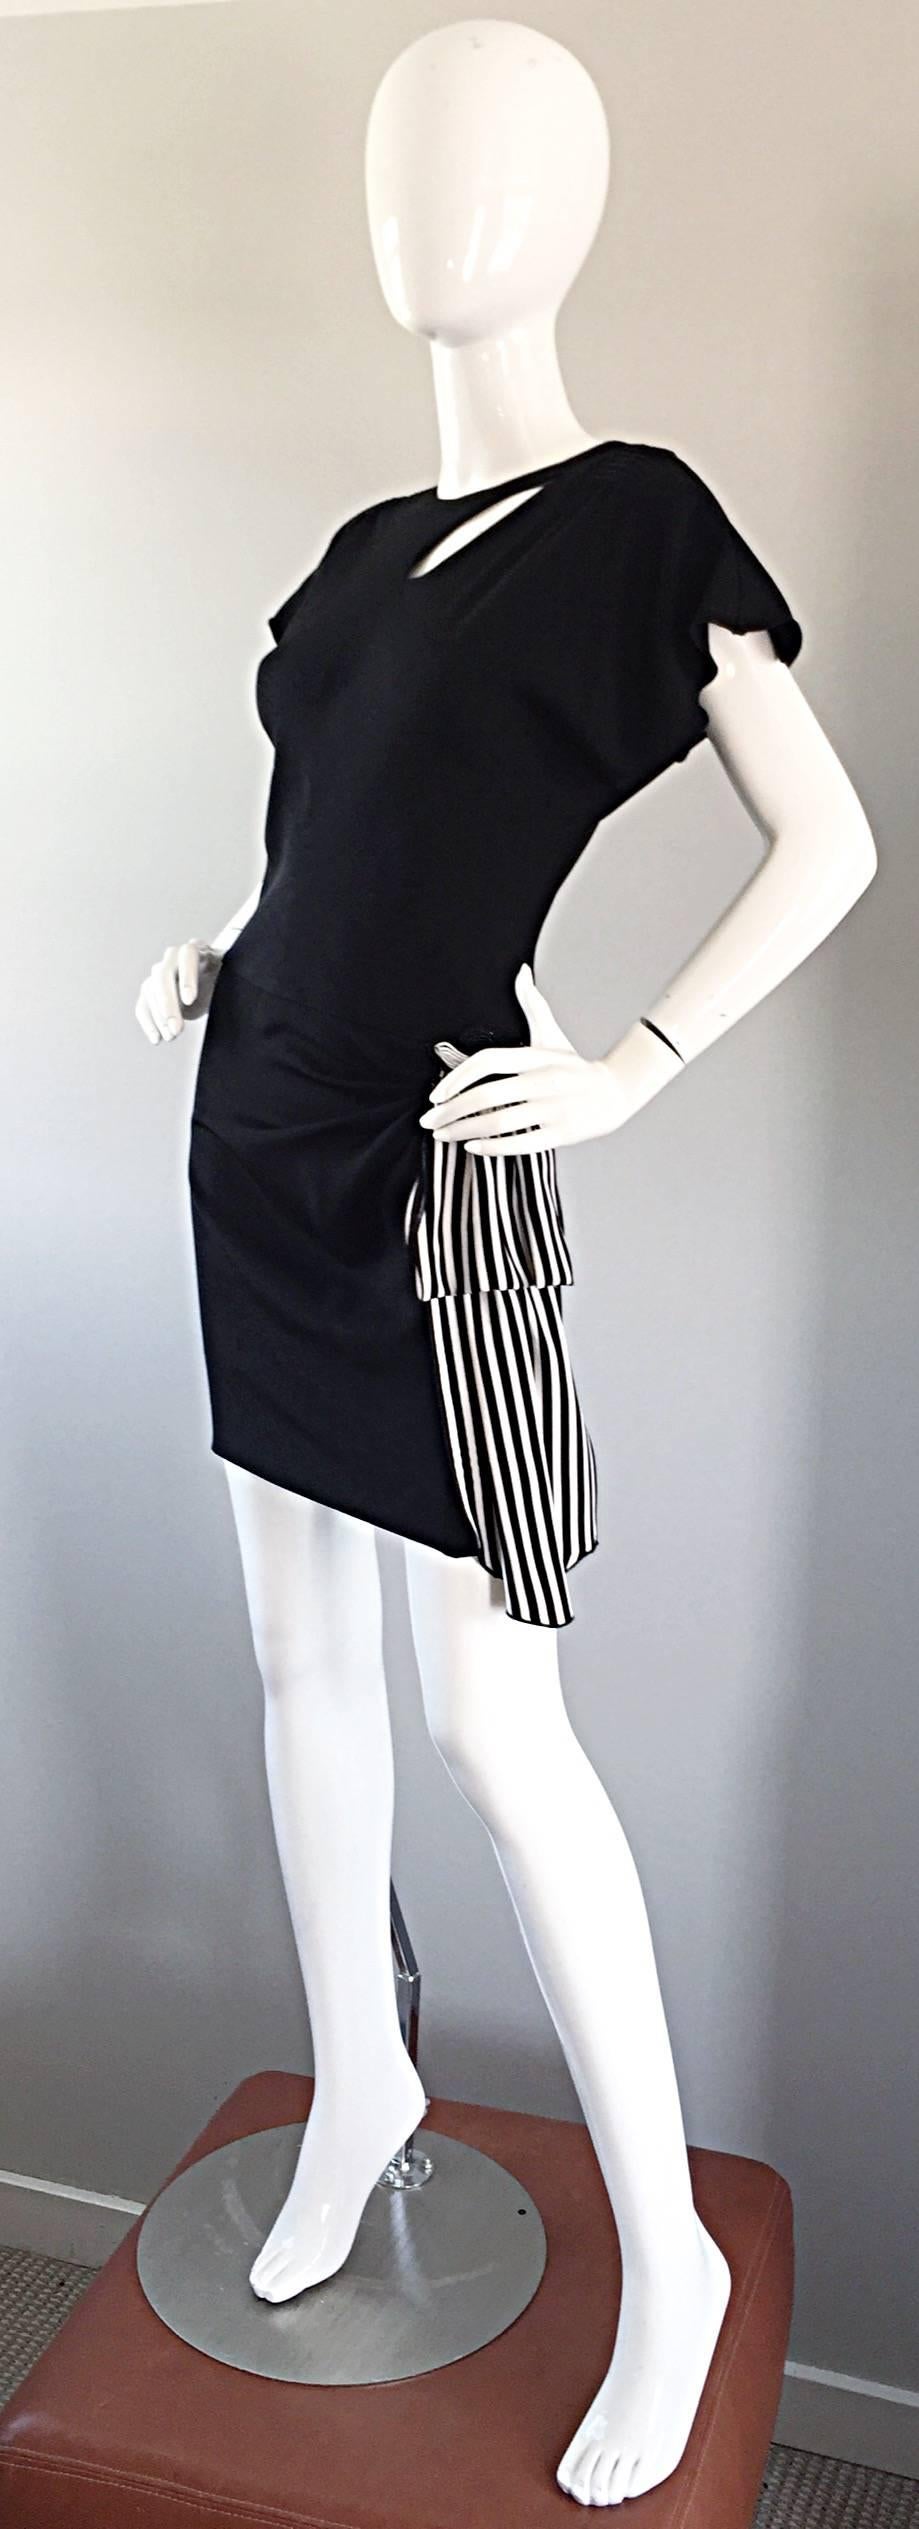 Women's Holly's Harp Vintage Avant Garde Black and White Silk Jersey Cut Out Mini Dress For Sale